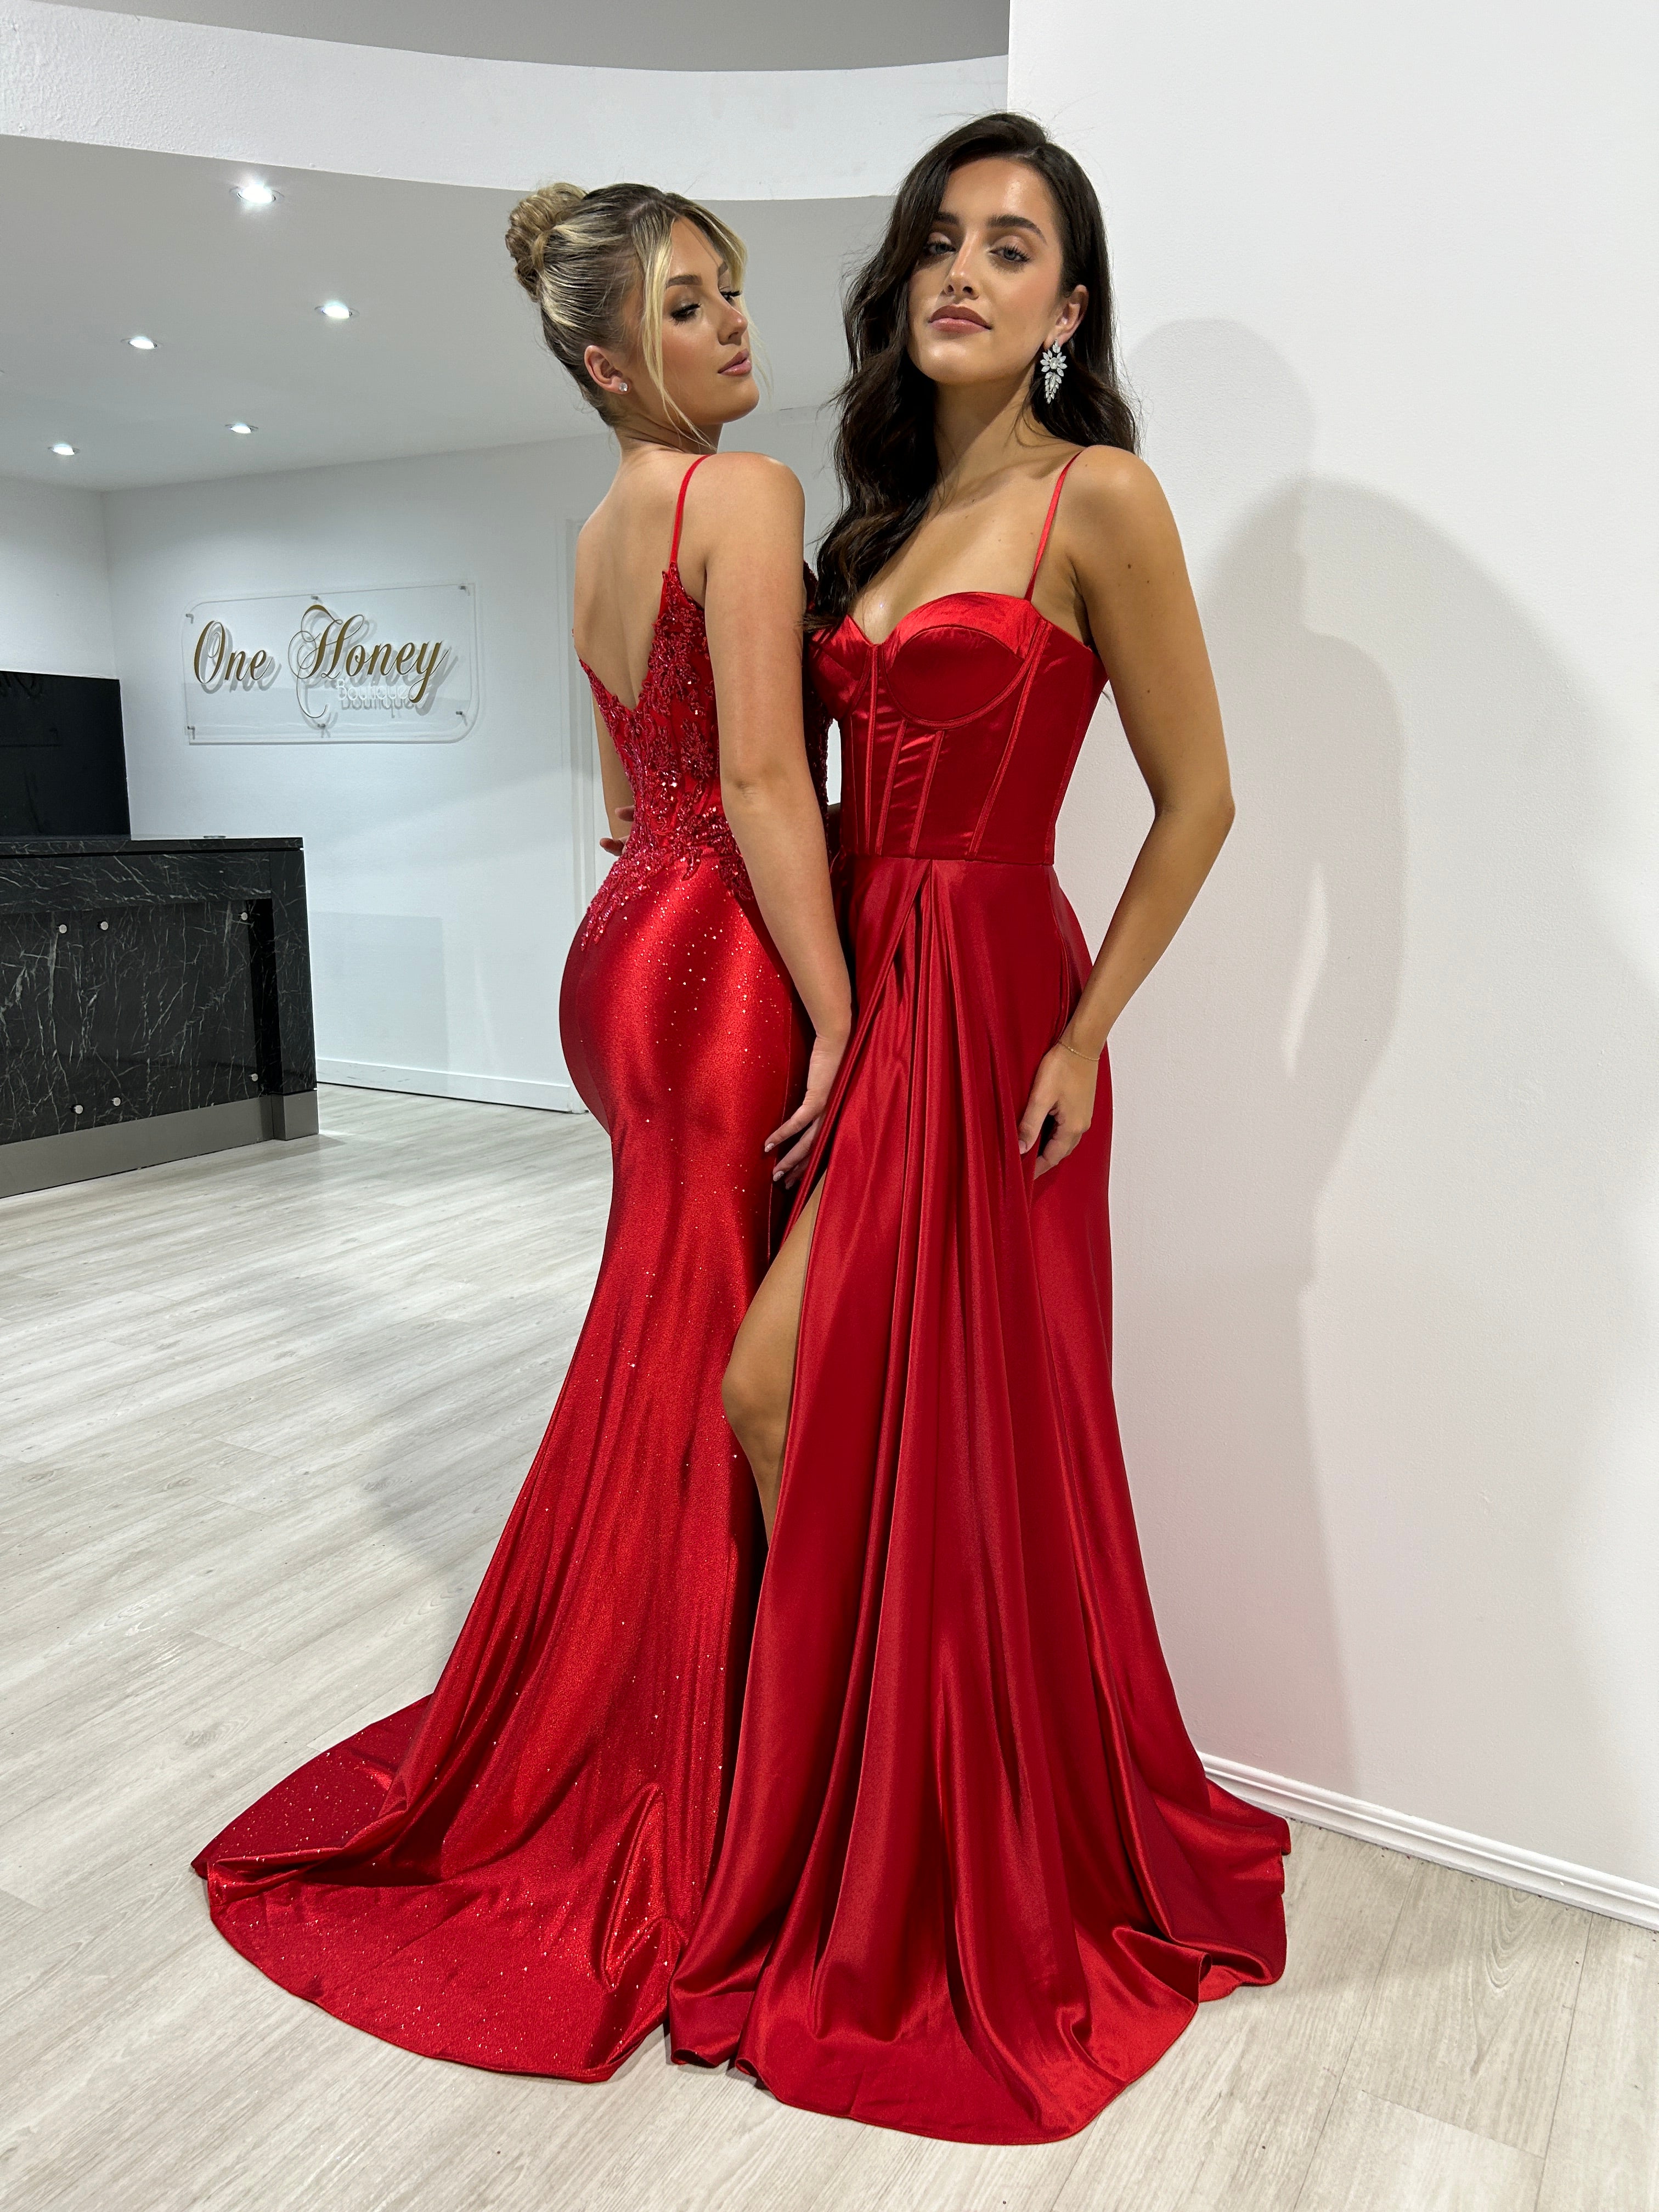 Honey Couture OLYMIA Red Embellished Stretch Glitter Satin Mermaid Formal Dress